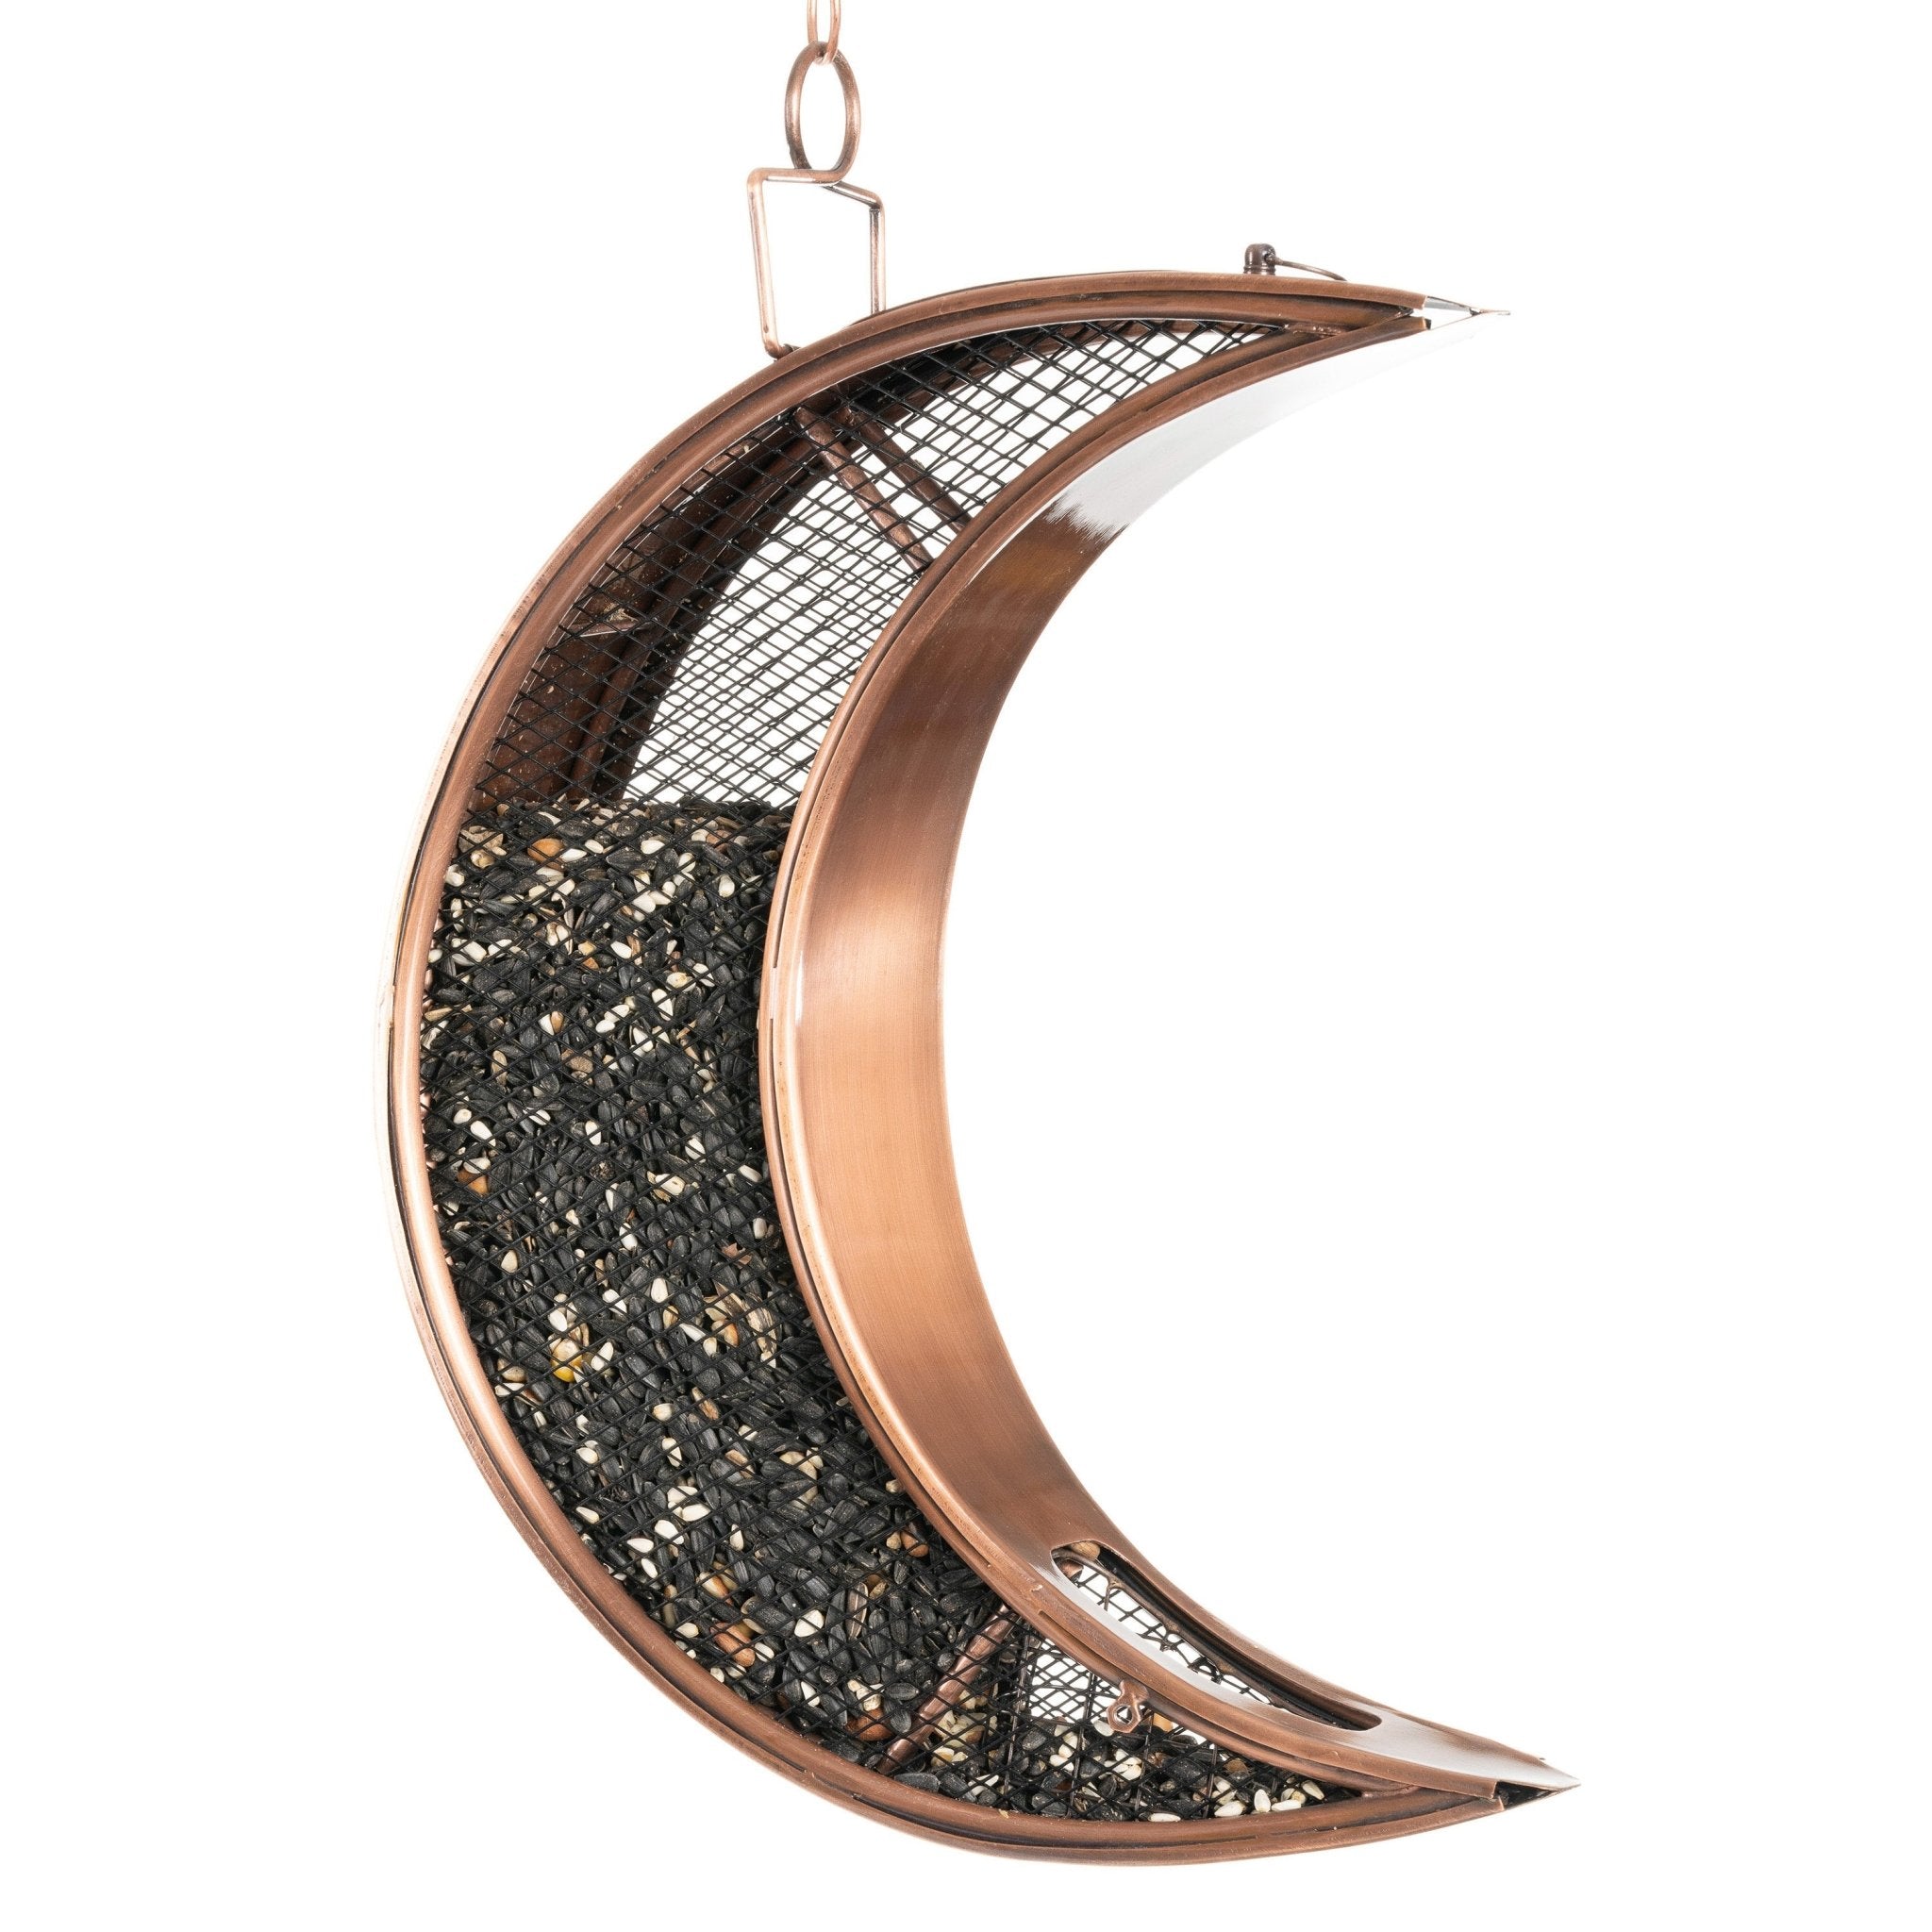 Over The Moon Copper Bird Feeder, with Mesh Panels - Good Directions